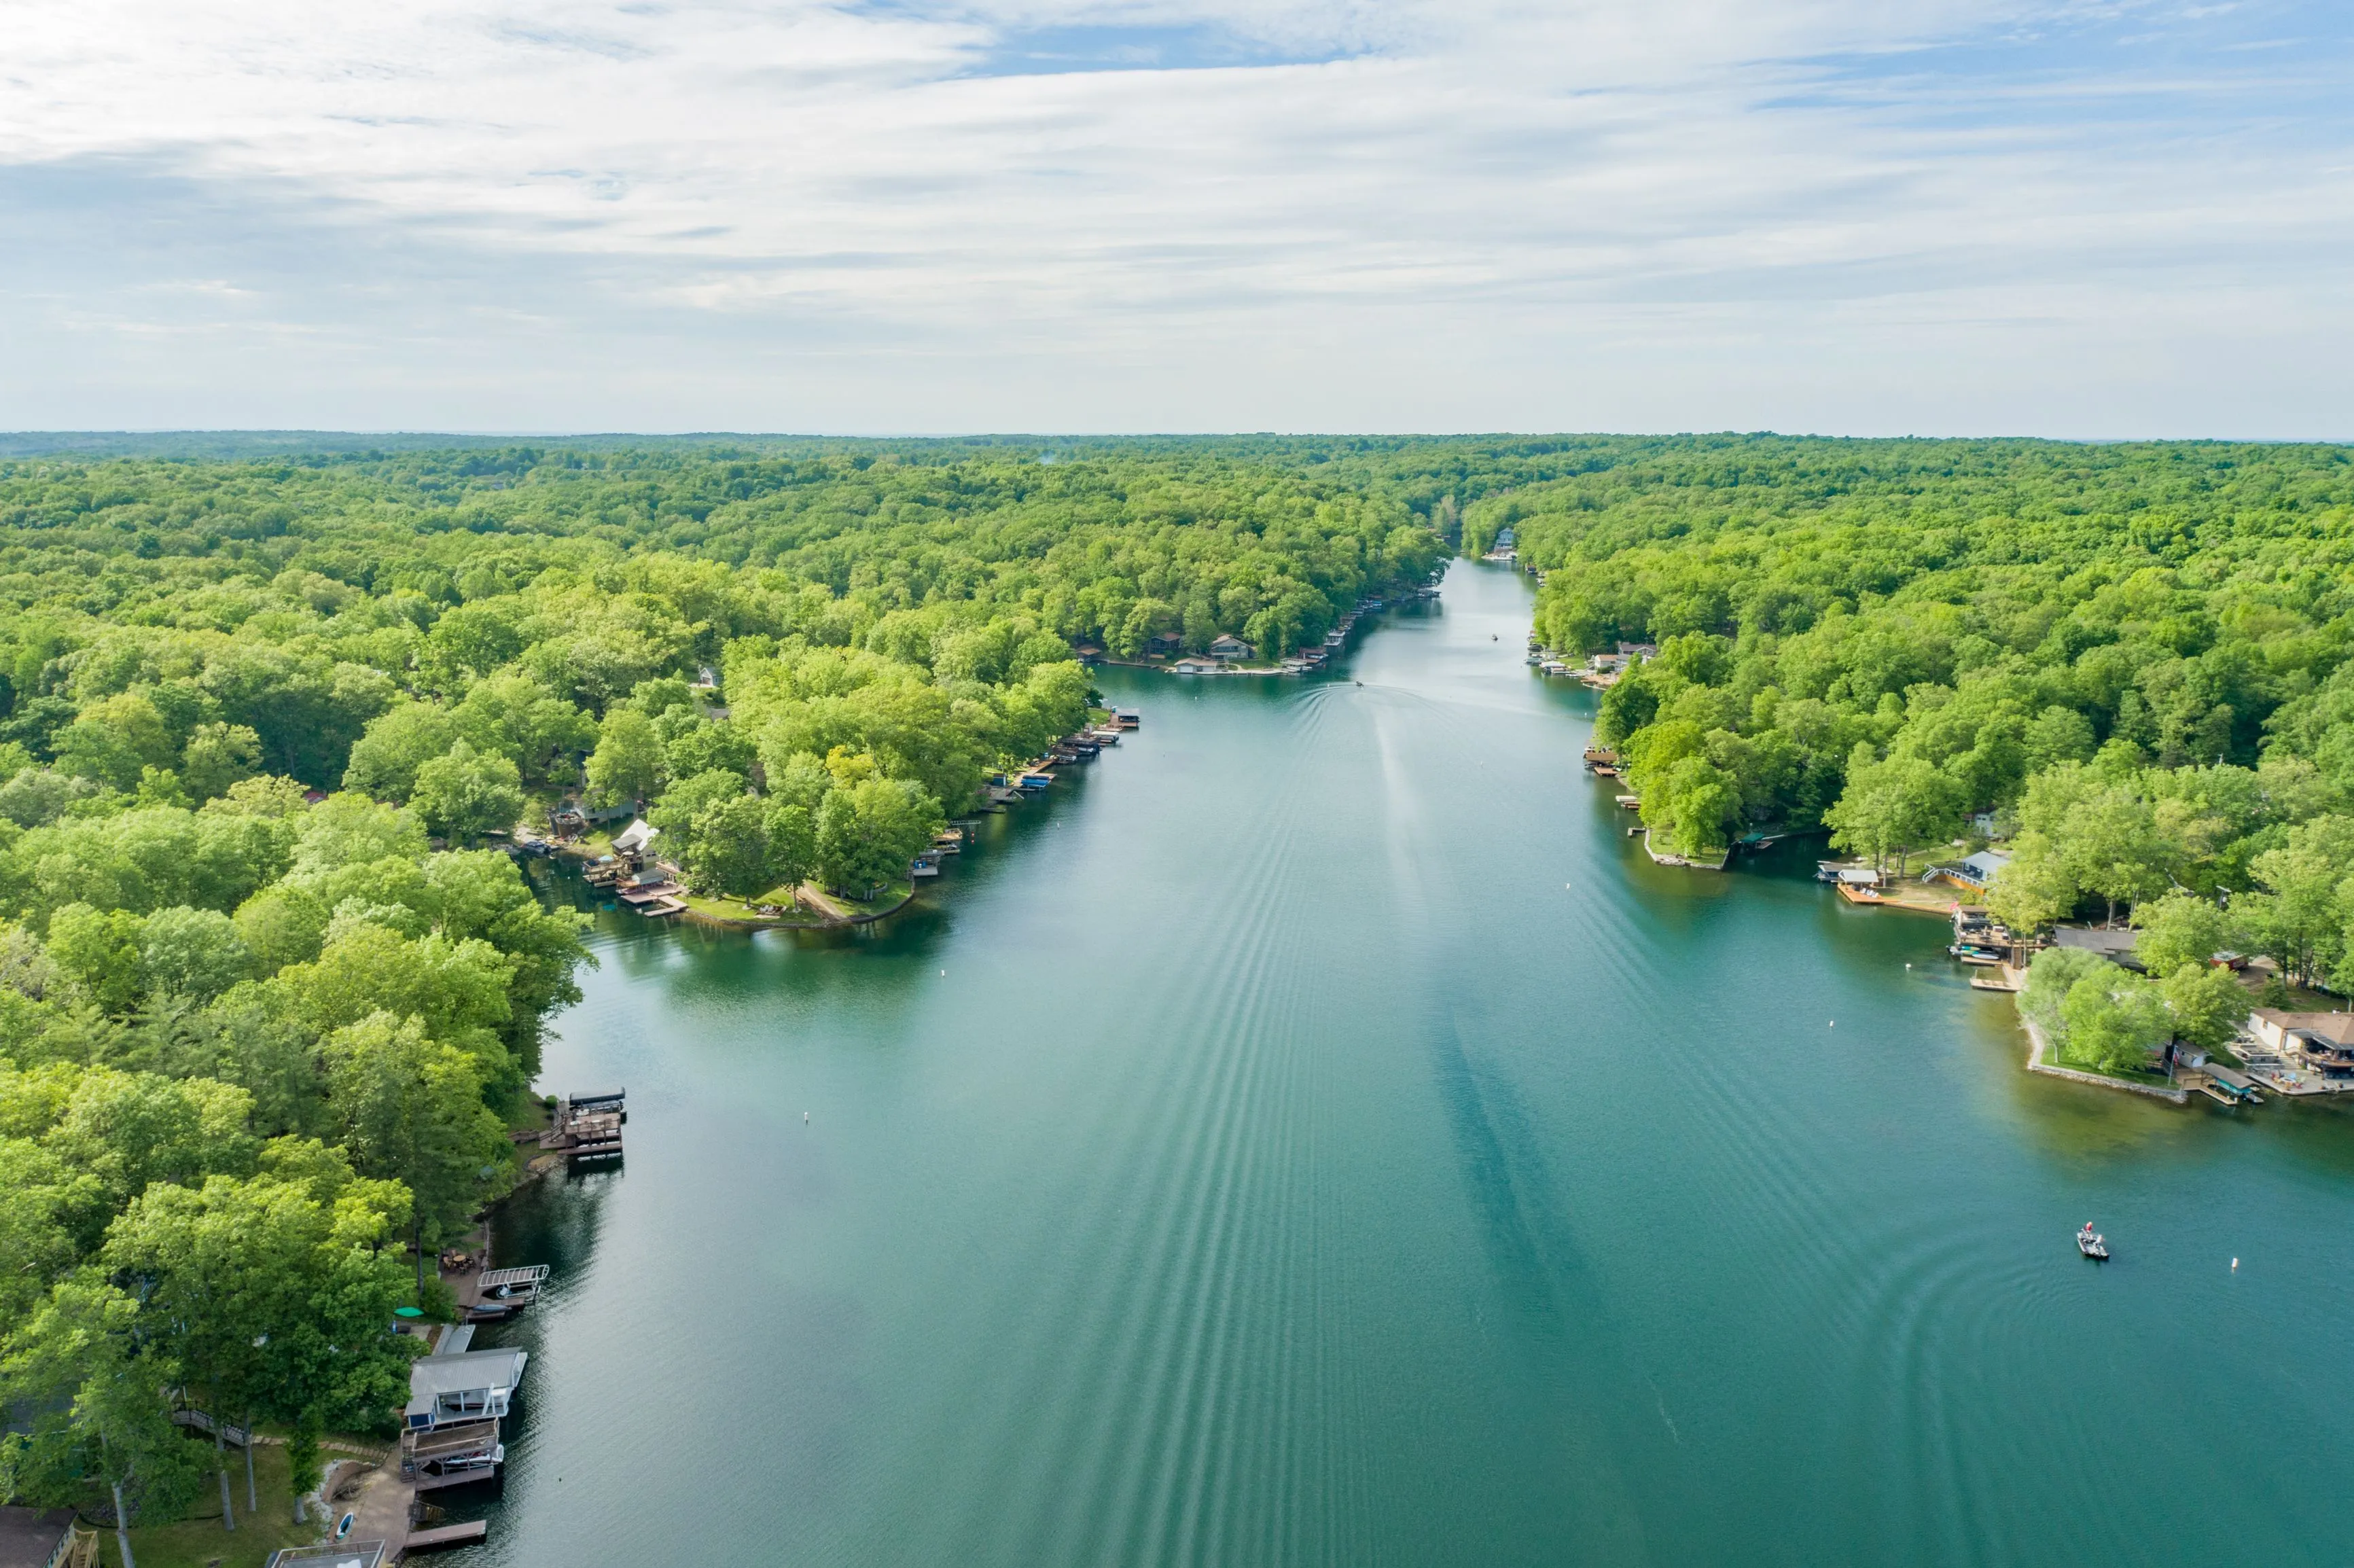 Aerial view of a serene river flowing through a lush green forest with docks along the banks.